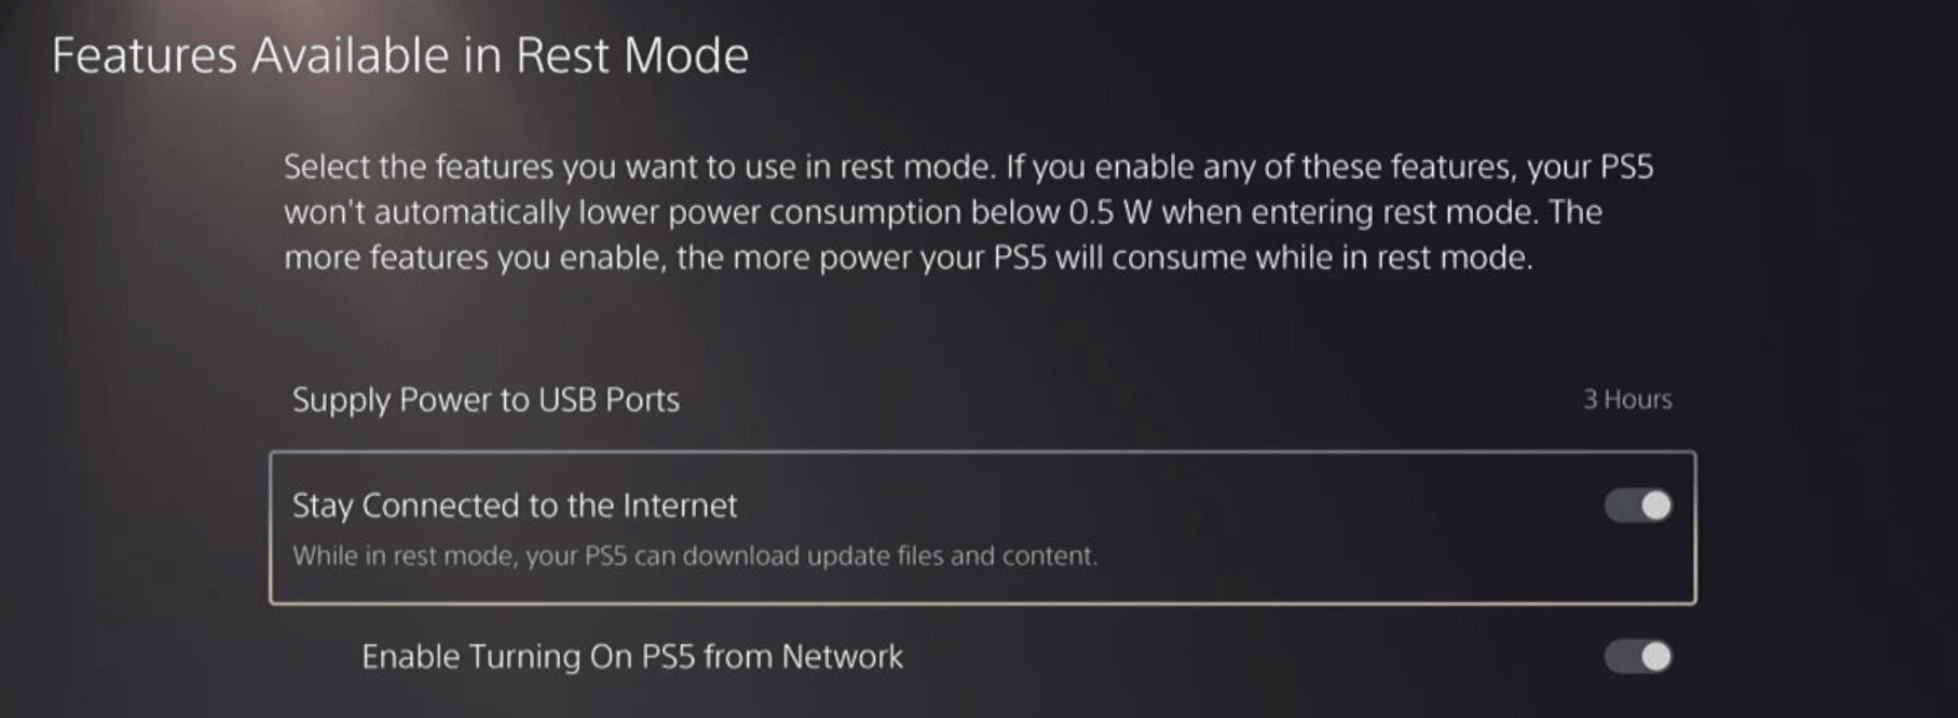 Stay Connected to the Internet is toggled in PS5 rest mode settings menu to enable automatic updates of LEGO Star Wars The Skywalker Saga